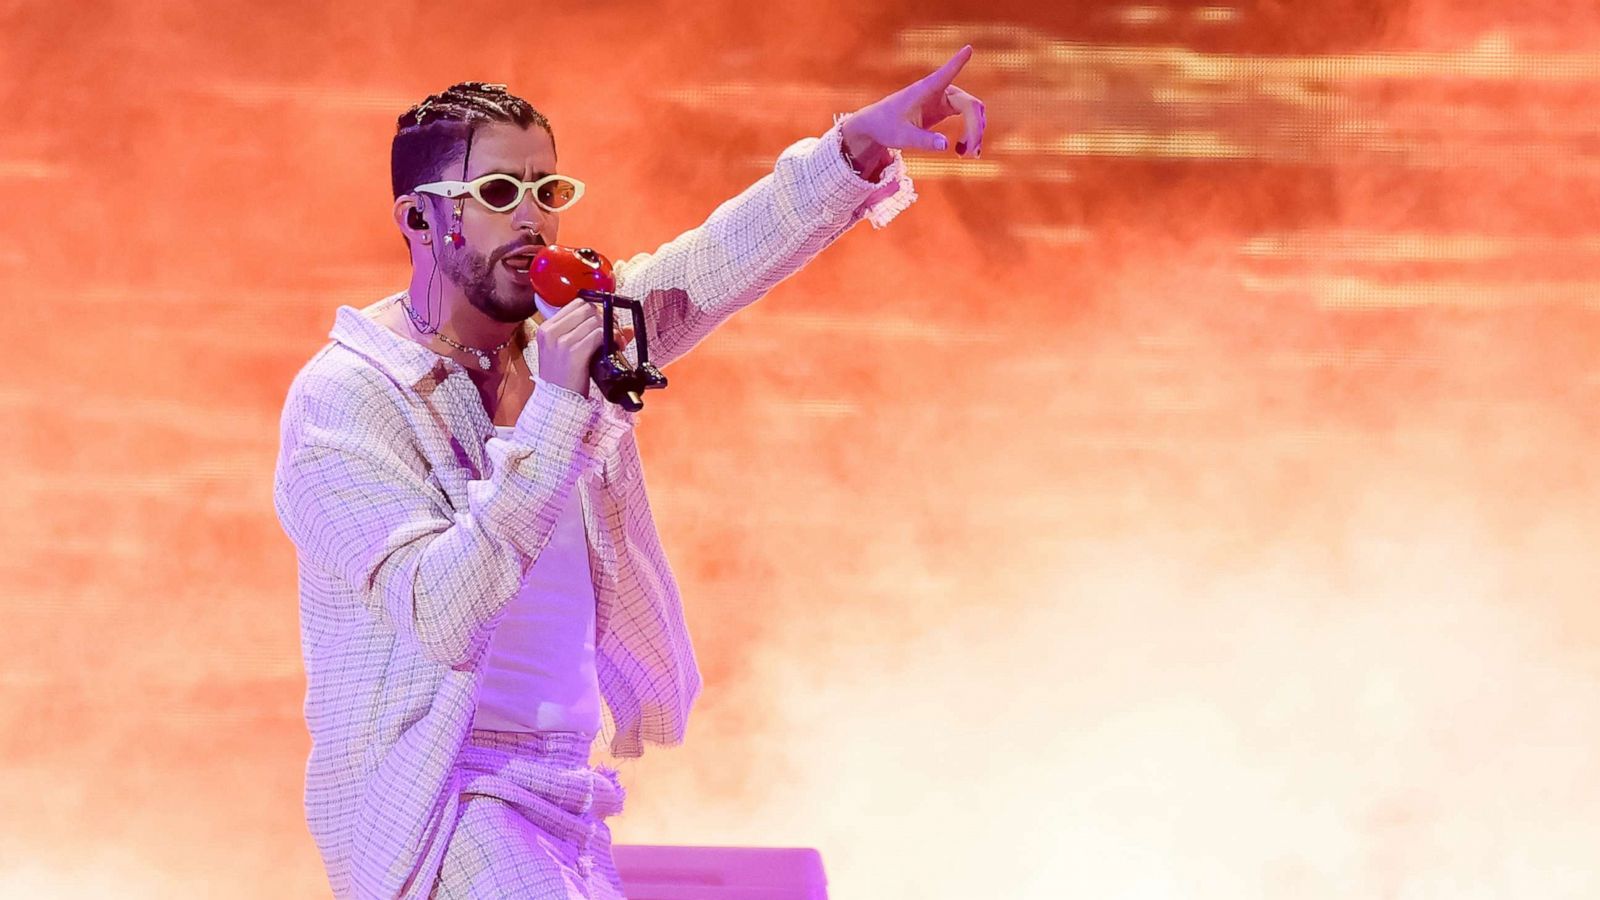 Grammys 2023: Bad Bunny makes history with album of the year nomination Morning America